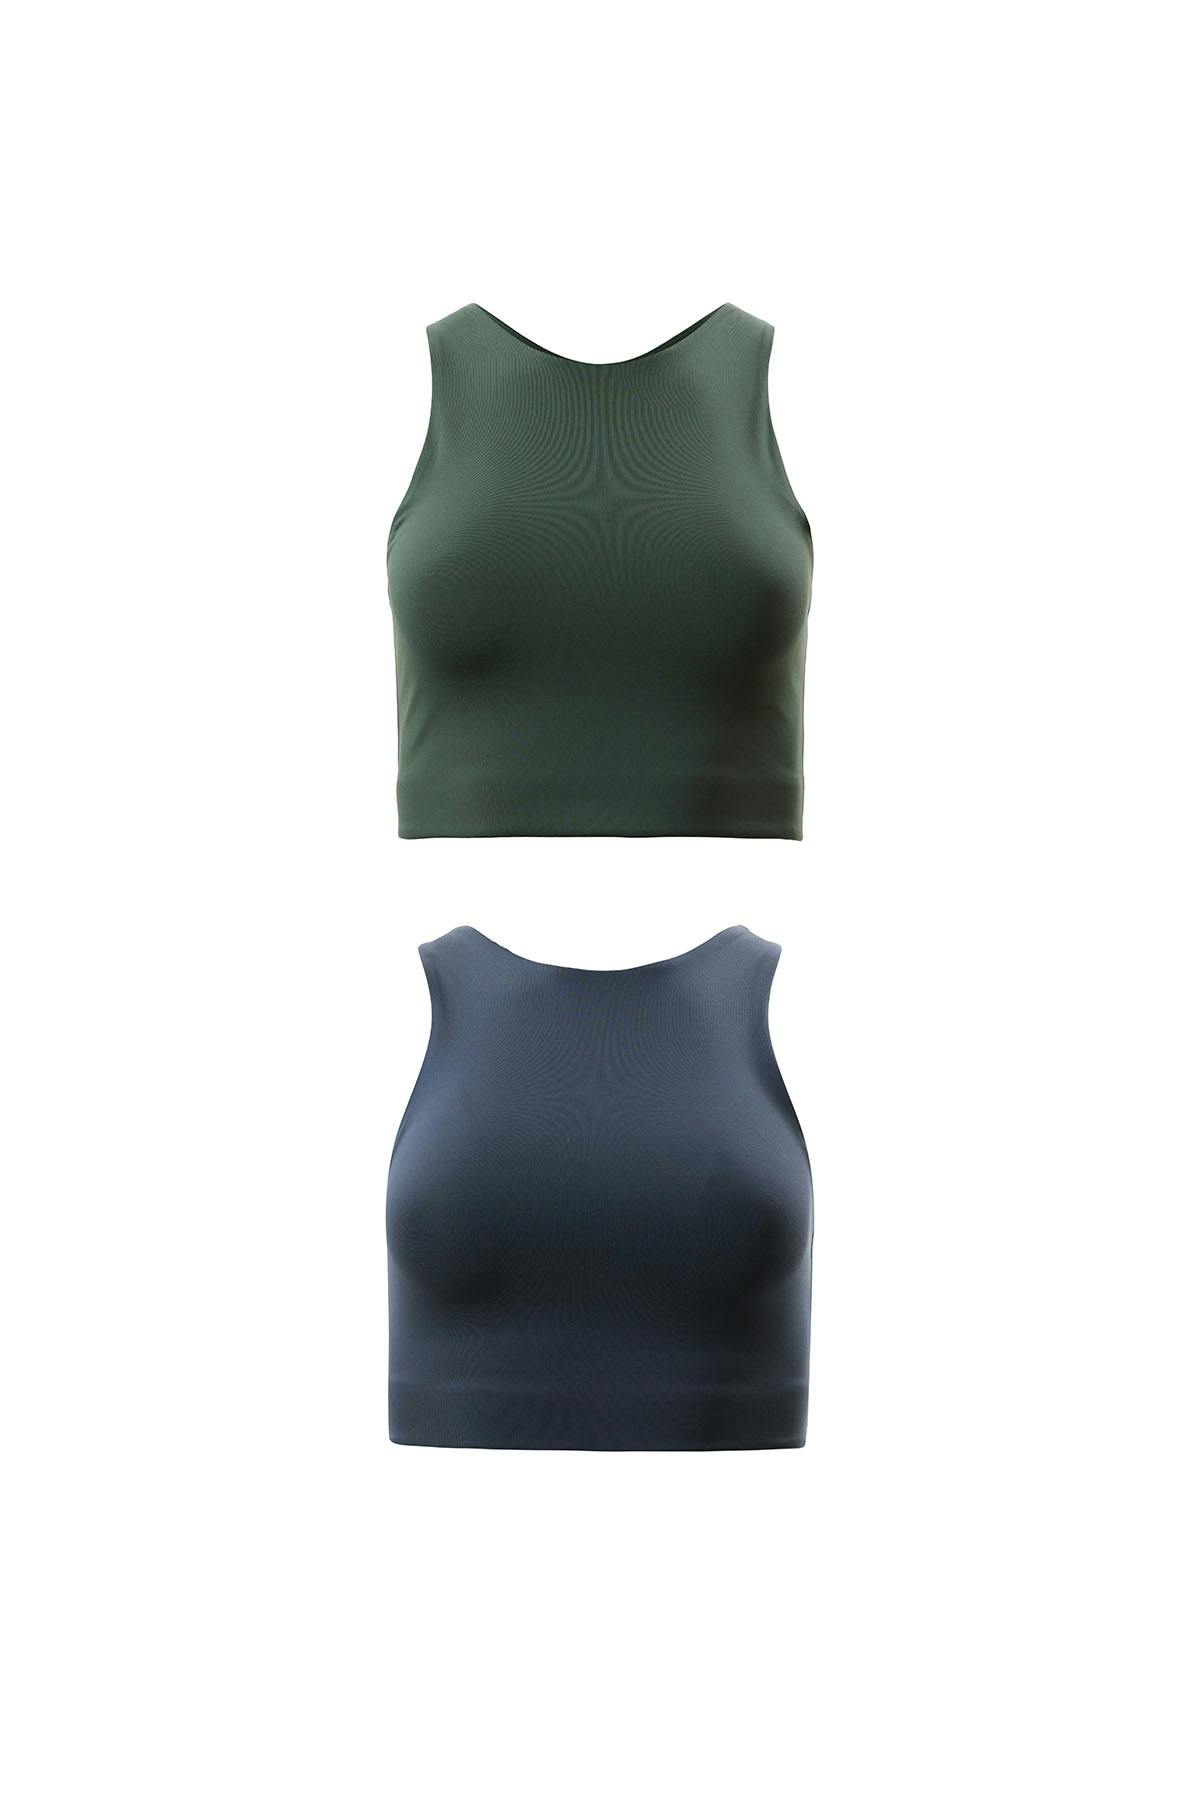 Buy Girlfriend Collective Dylan Green Crop Bra from Next USA